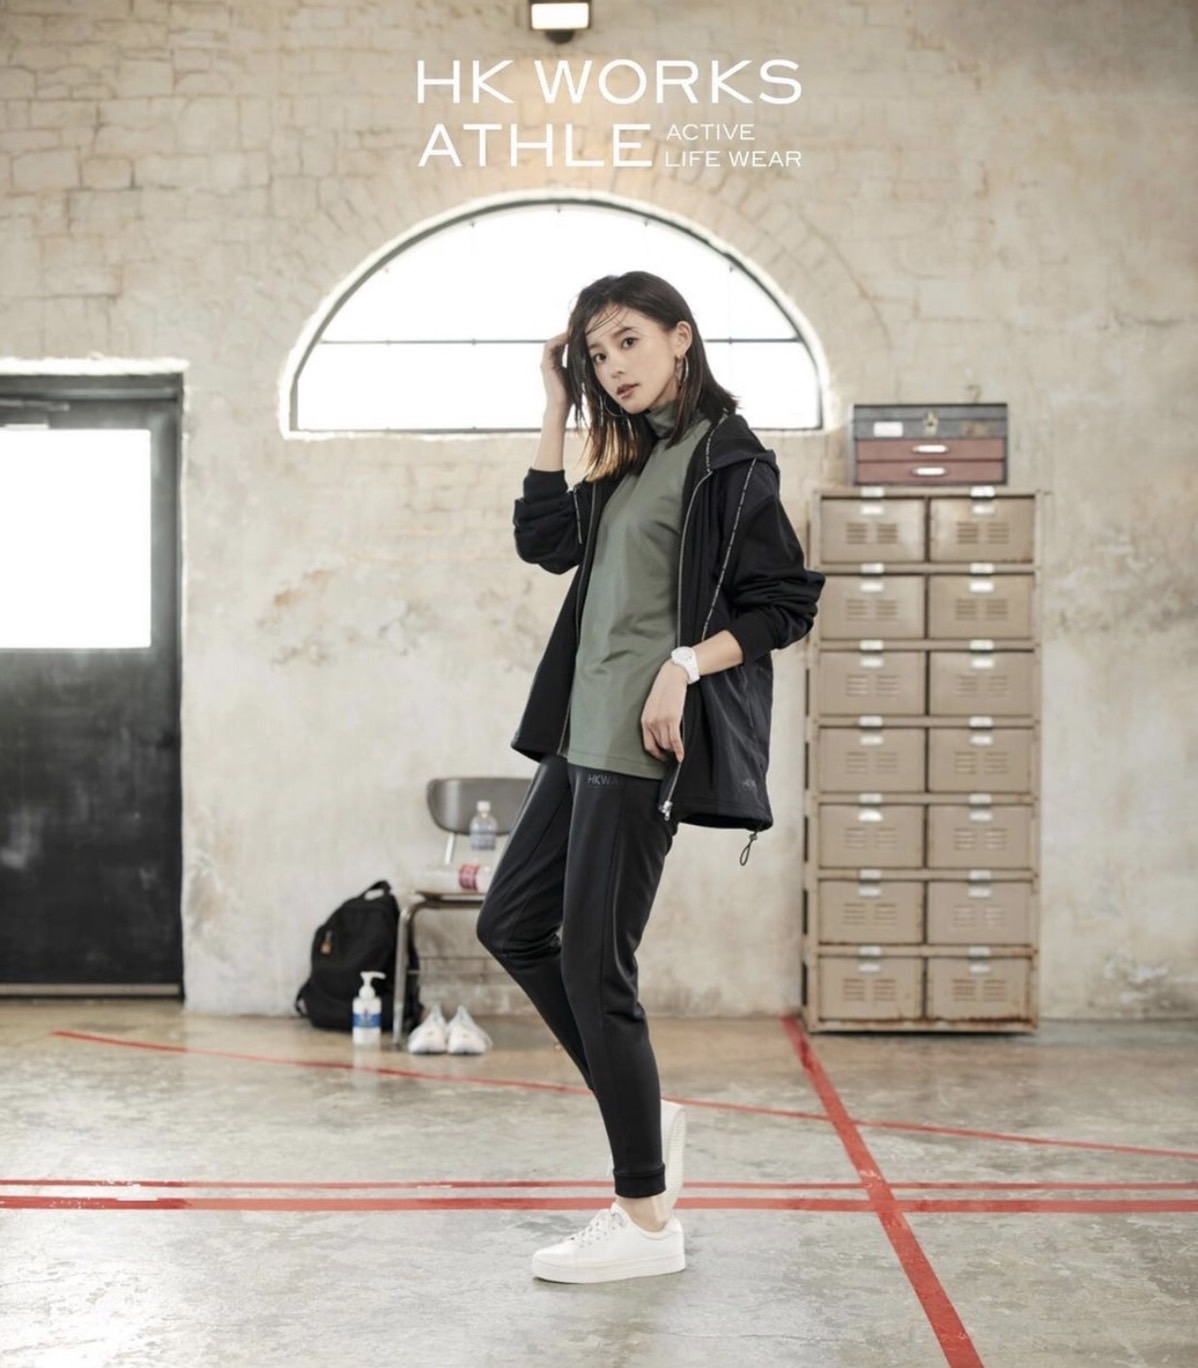 HK WORKS ATHLE ACTIVE LIFE WEAR